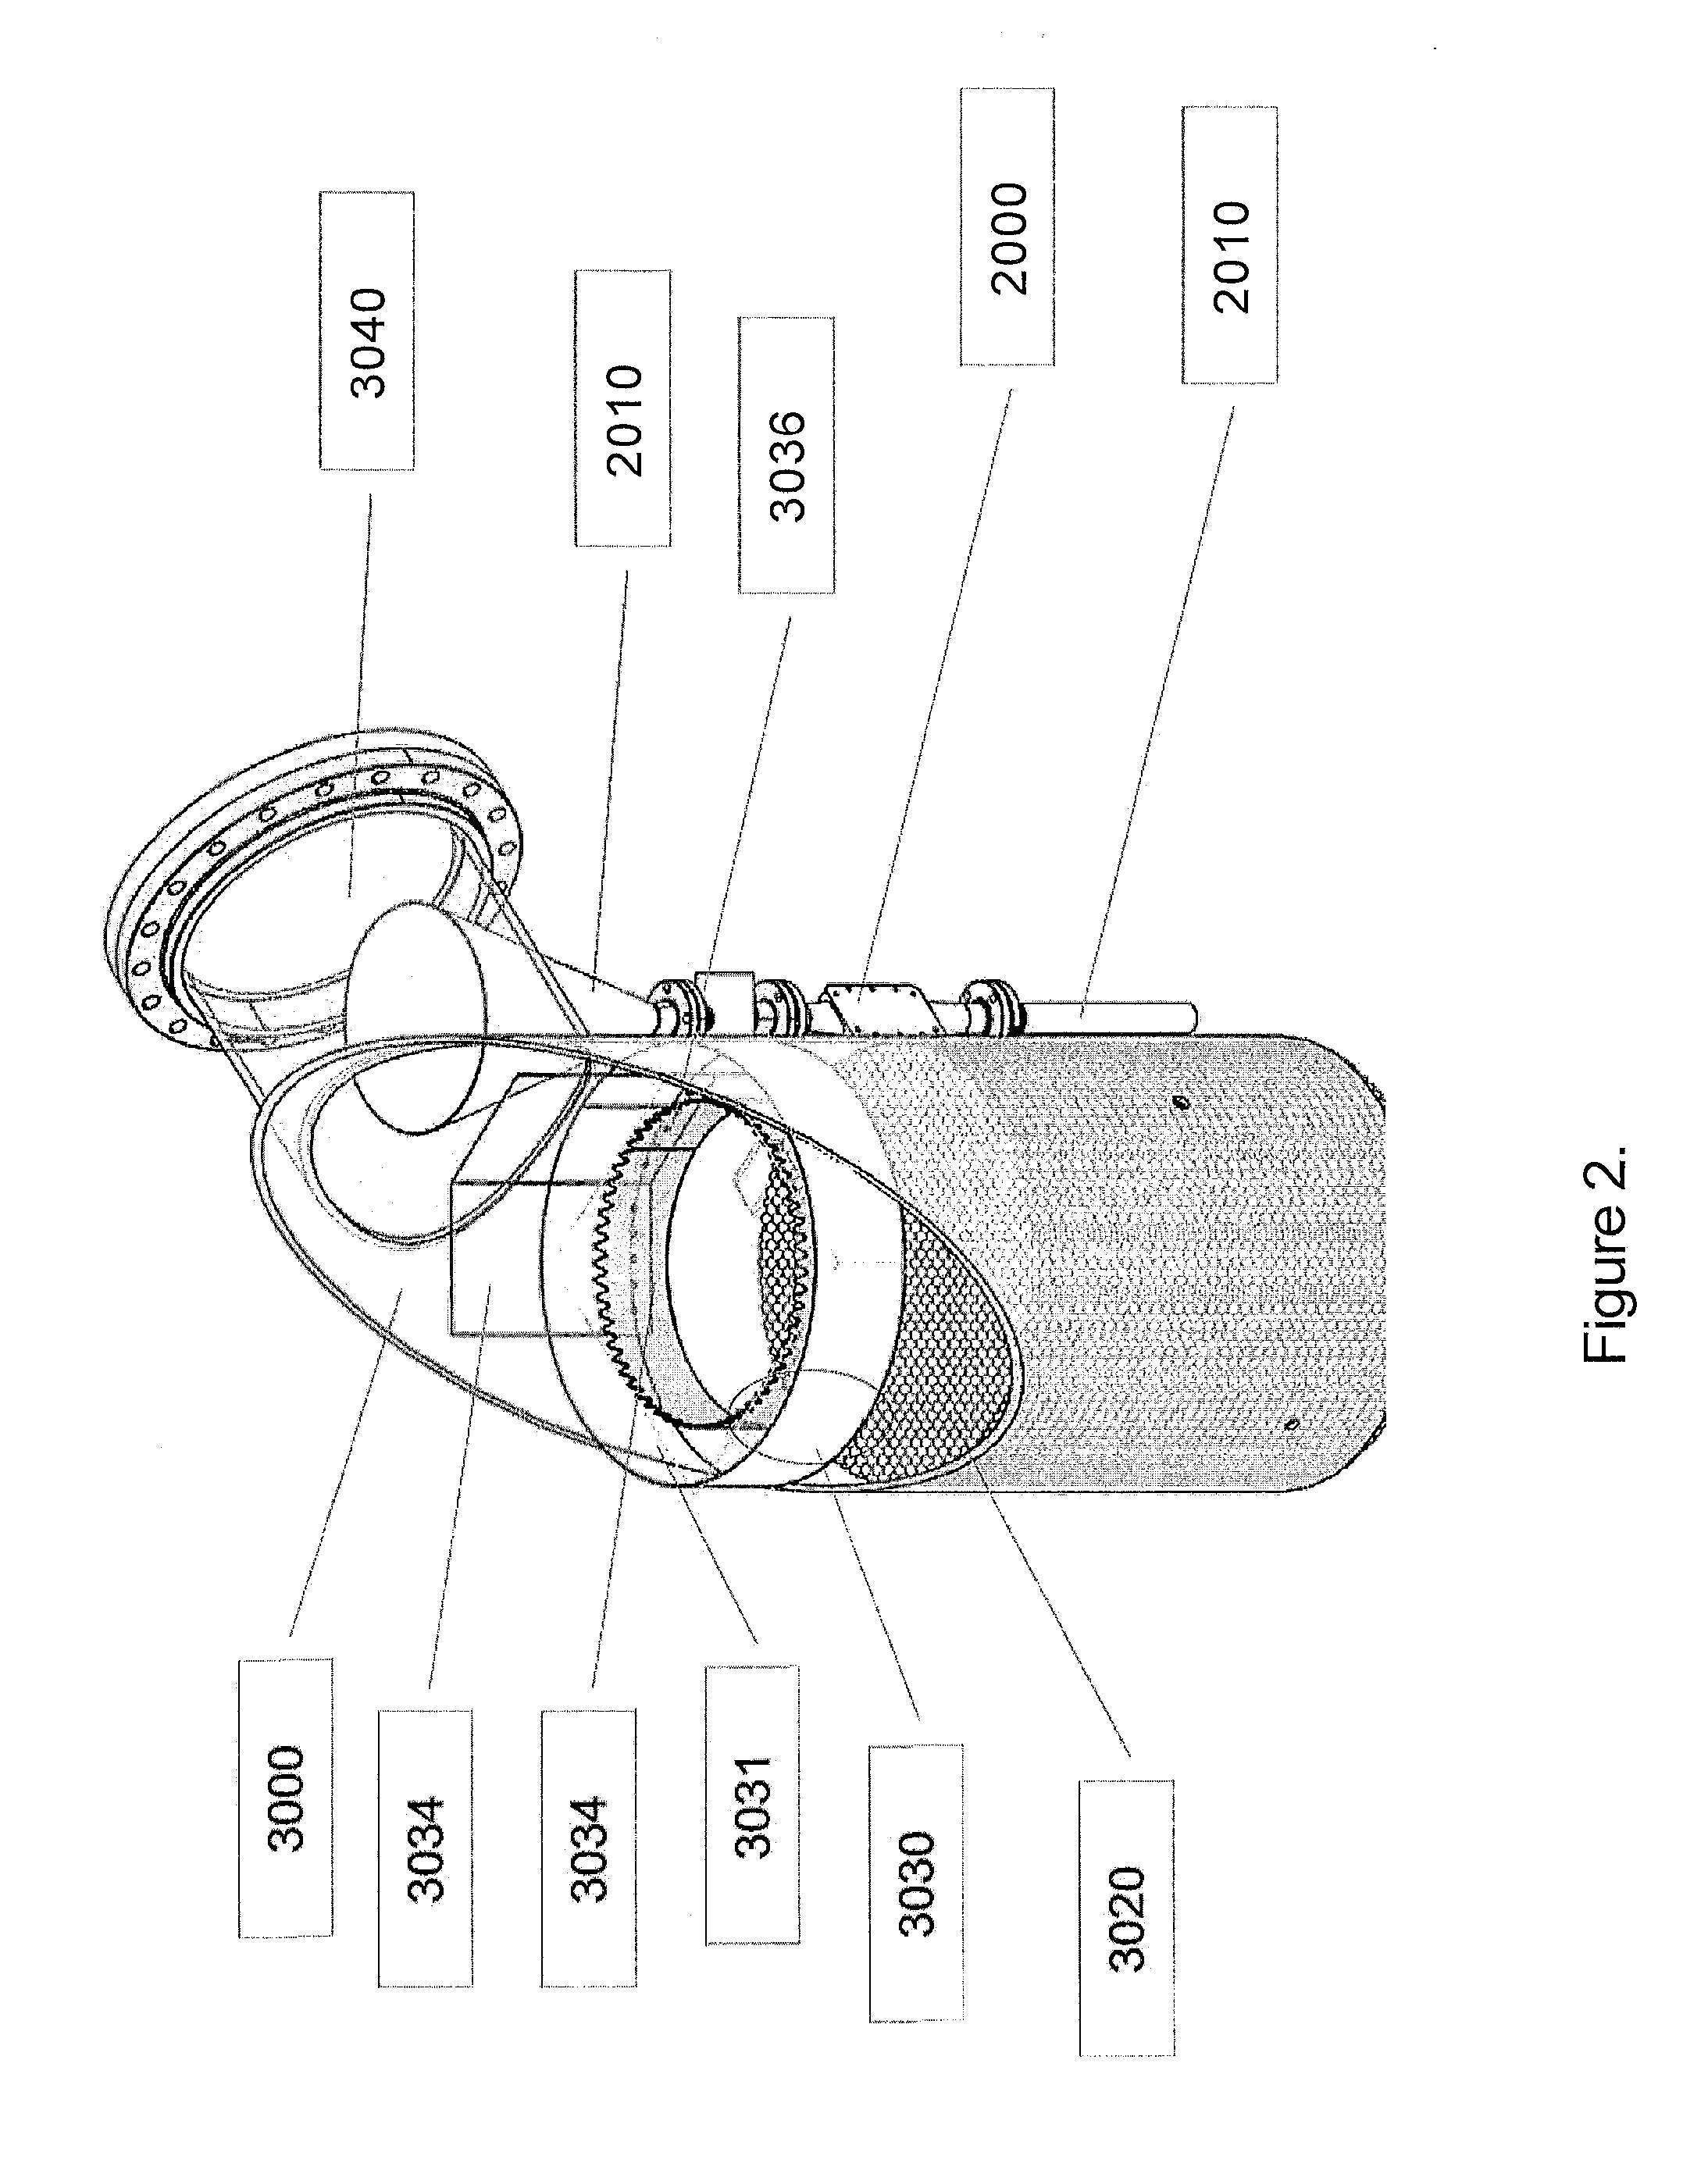 Process and Apparatus for In-line Degassing of a Heterogeneous Fluid using Acoustic Energy